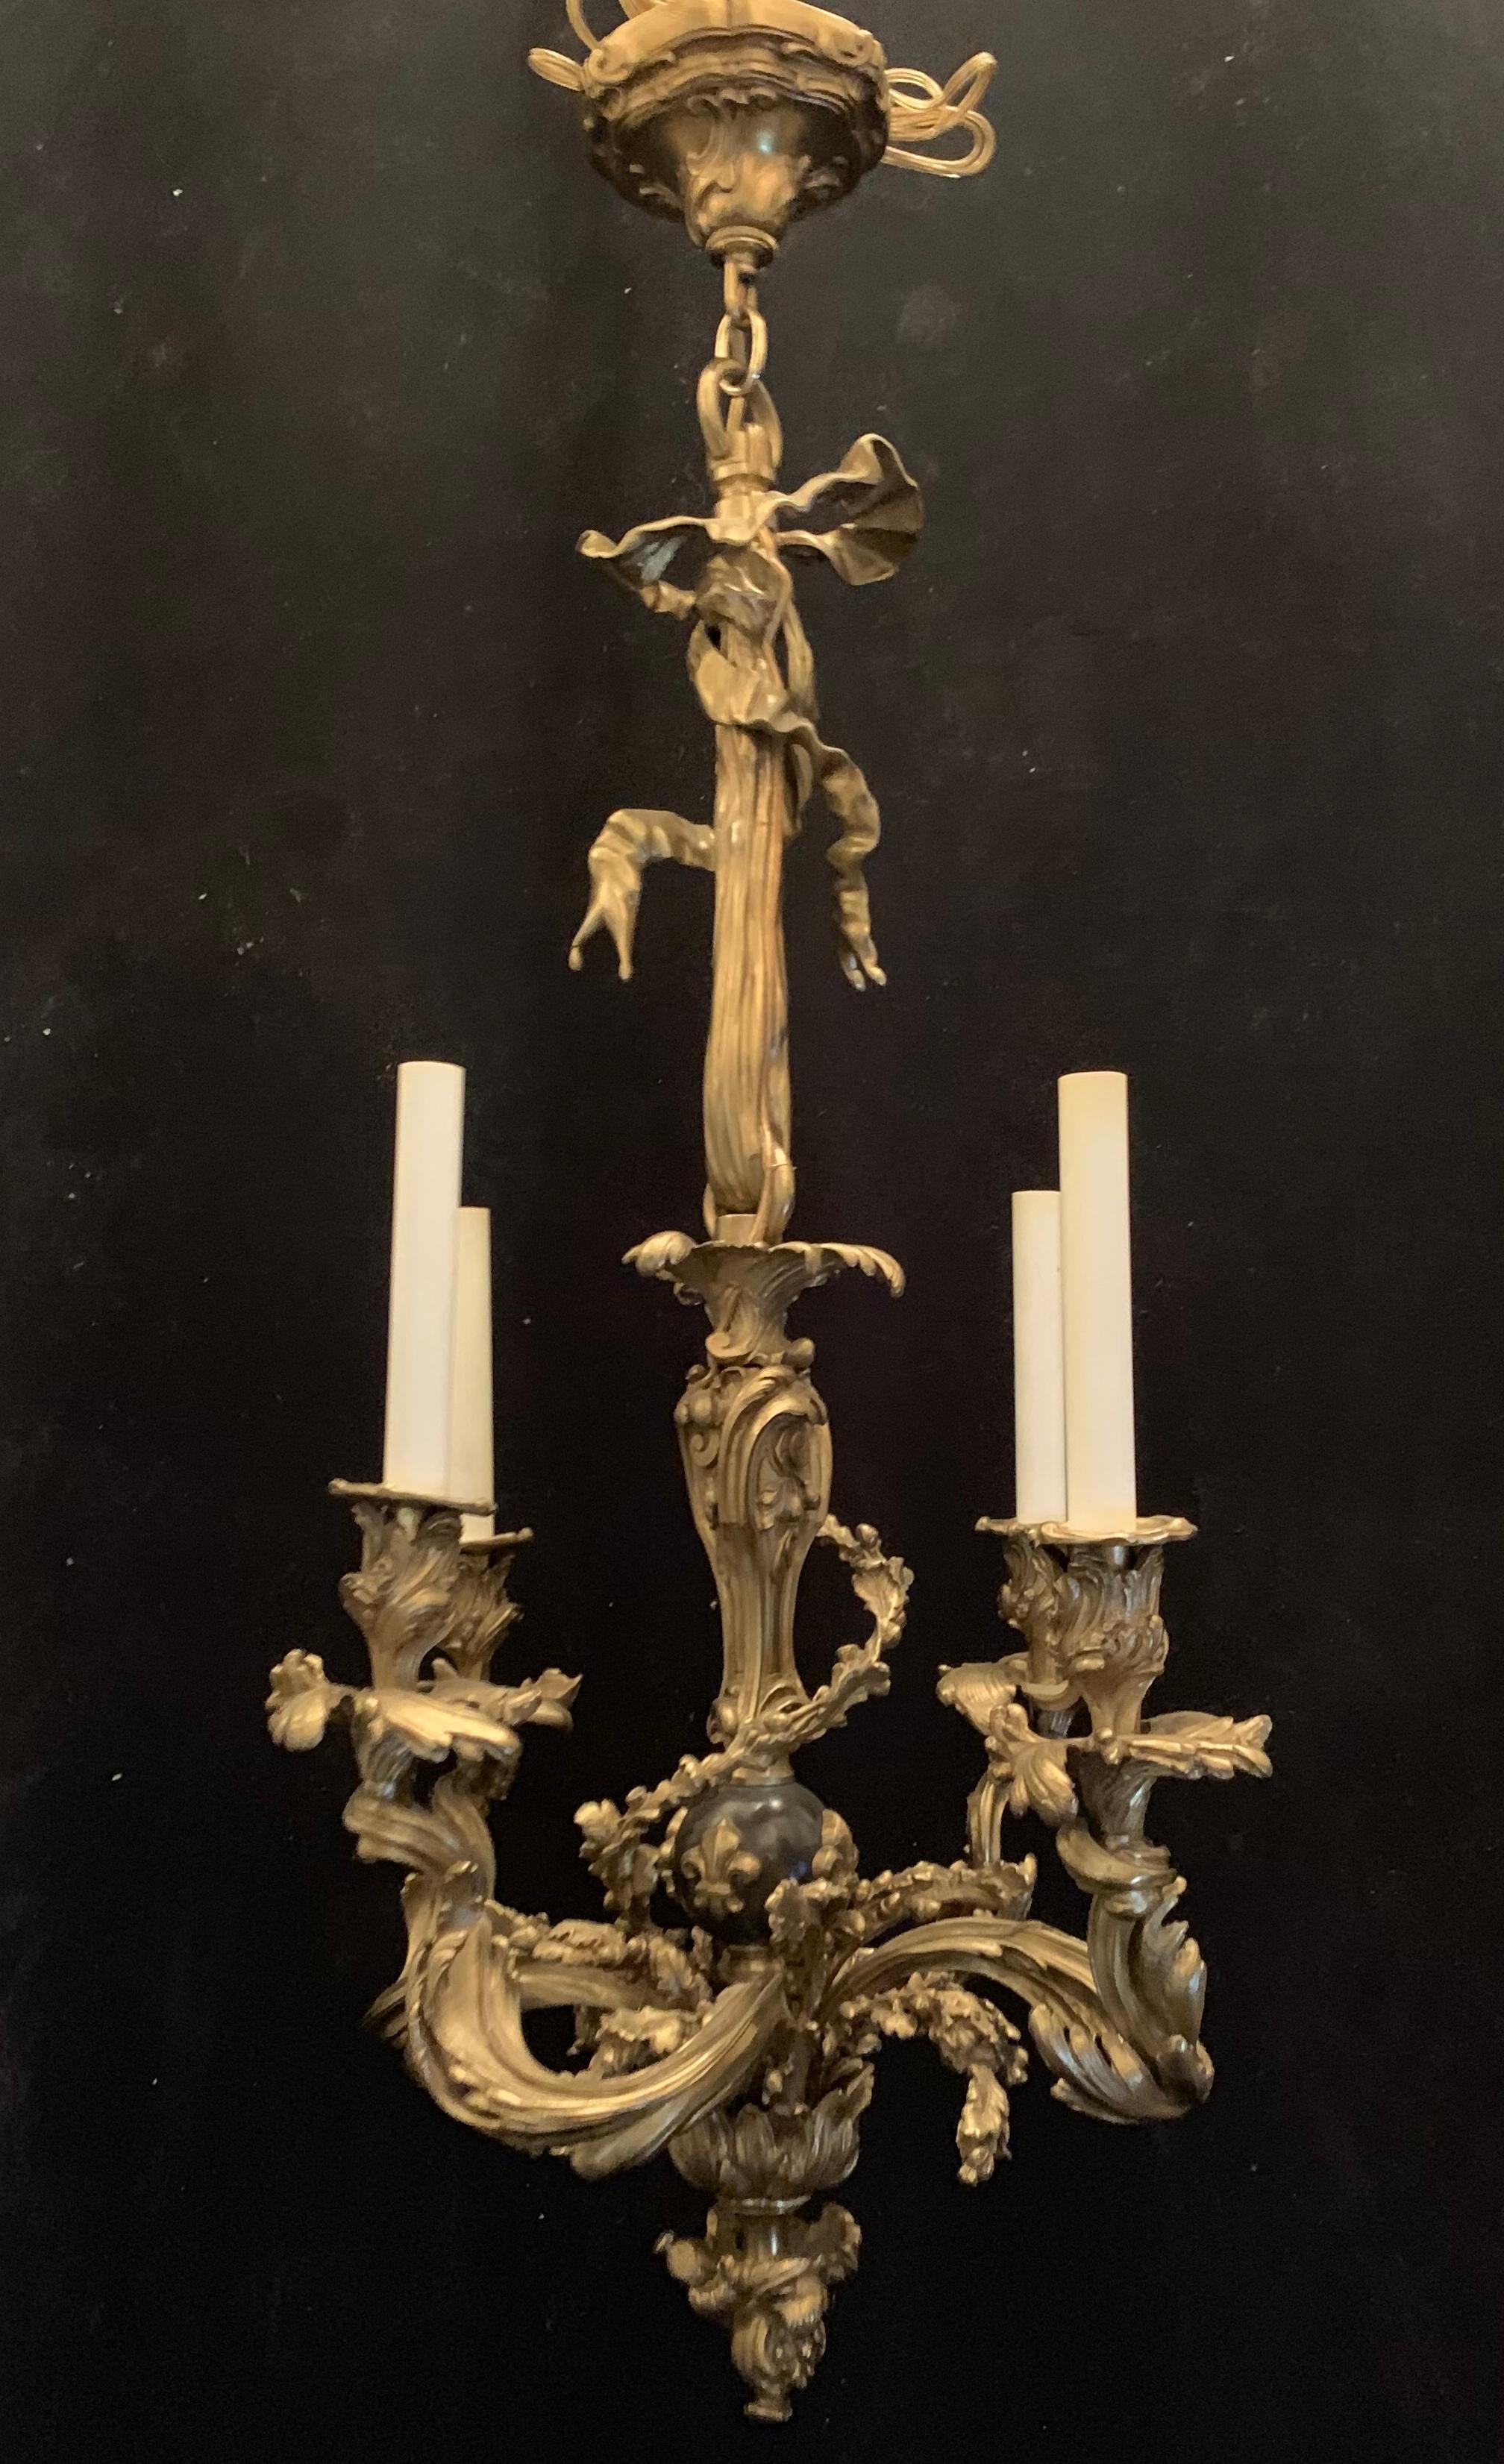 A wonderful French neoclassical gilt bronze and patinated bow / tassel Rococo style 4 candelabra light chandelier with fleur-de-lis appliques.